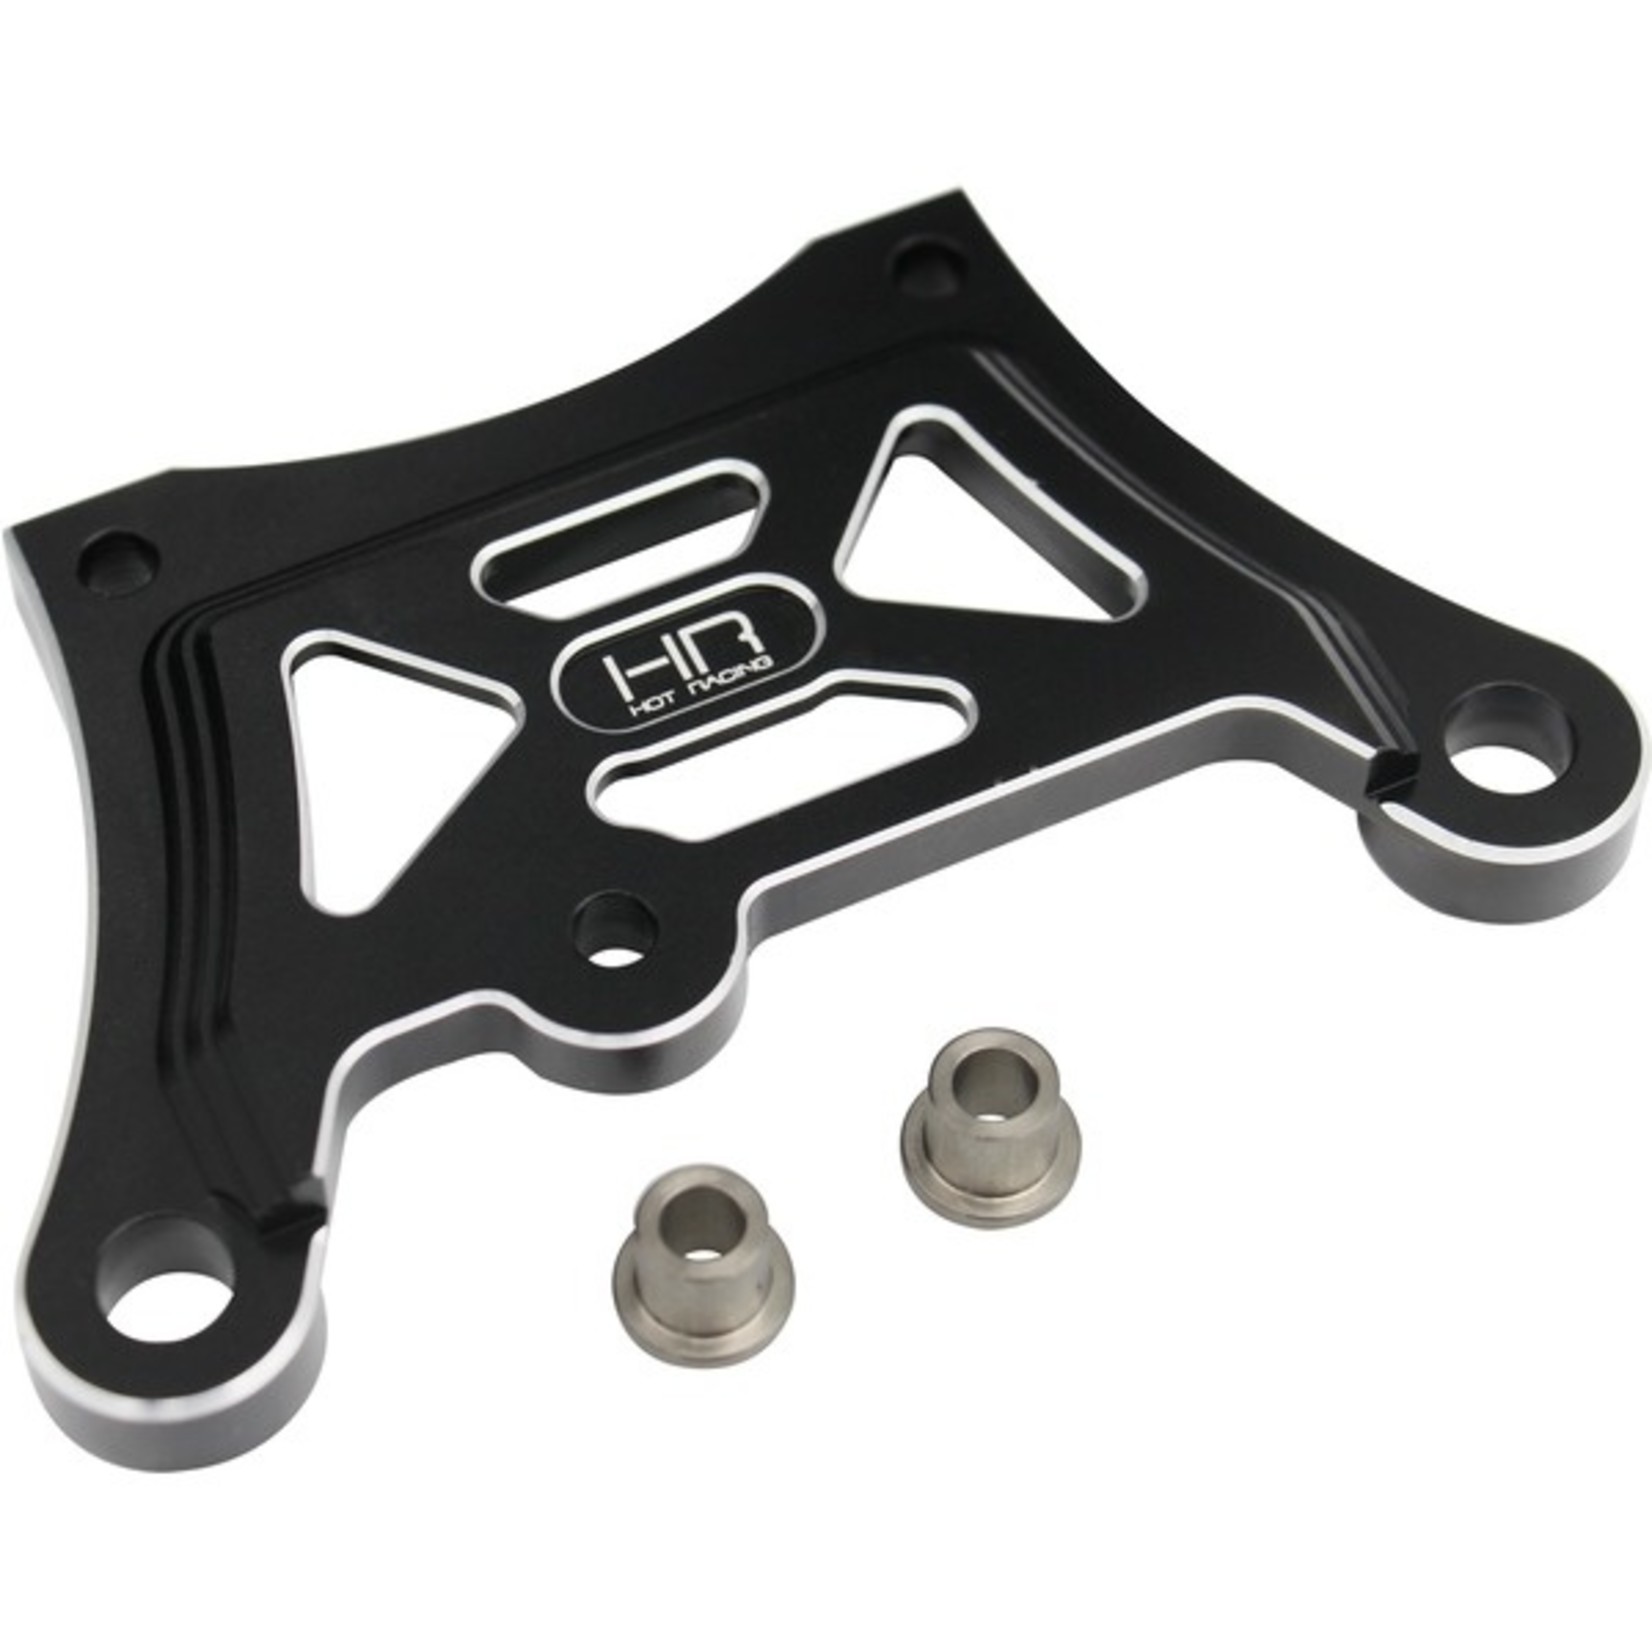 Hot Racing Alum. Front Top Plate Chassis Brace, for Losi DBXL-E